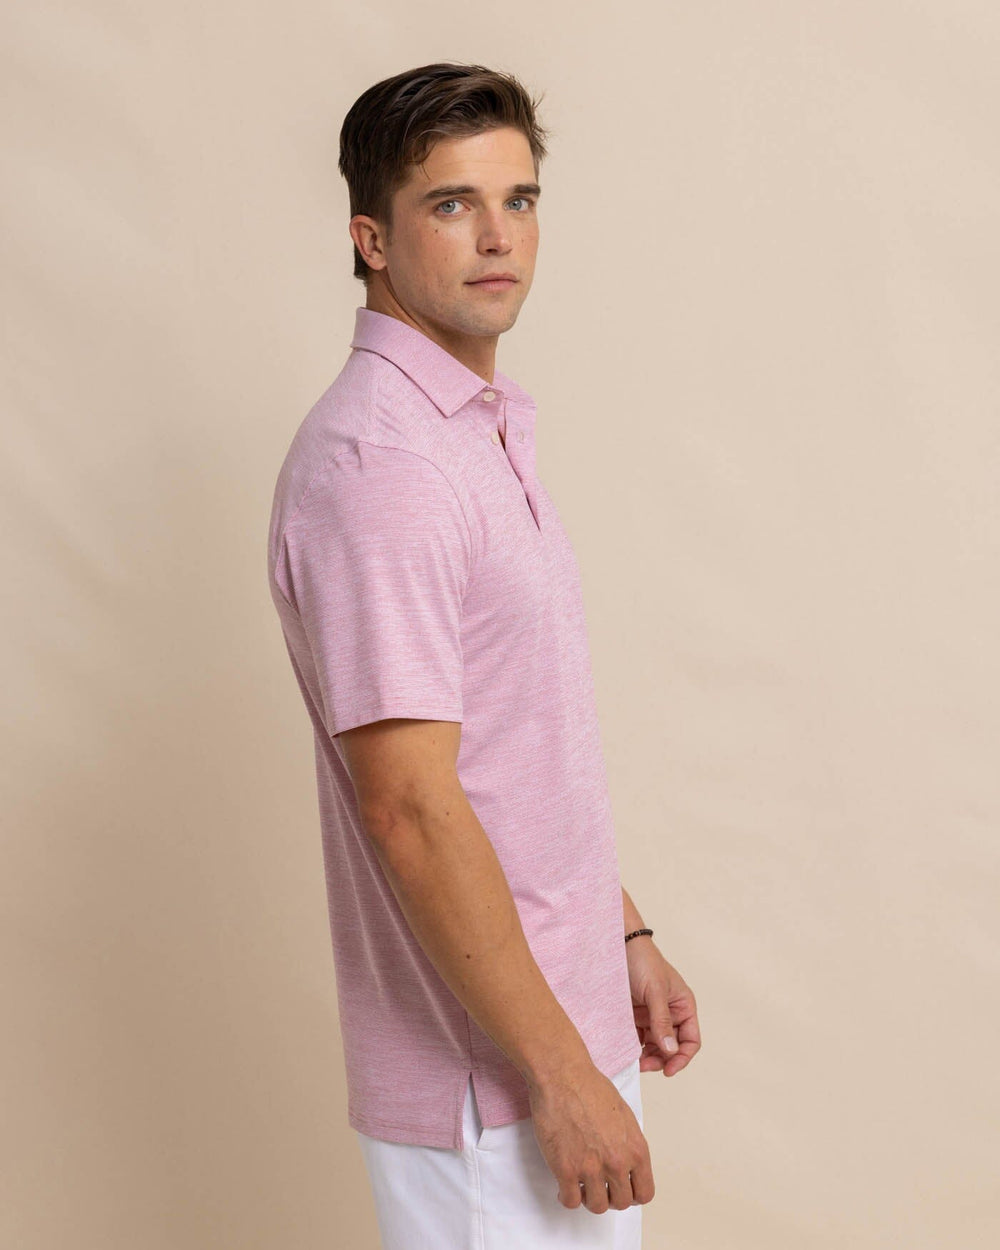 The front view of the Southern Tide Team Colors Driver Spacedye Polo Shirt by Southern Tide - Crimson